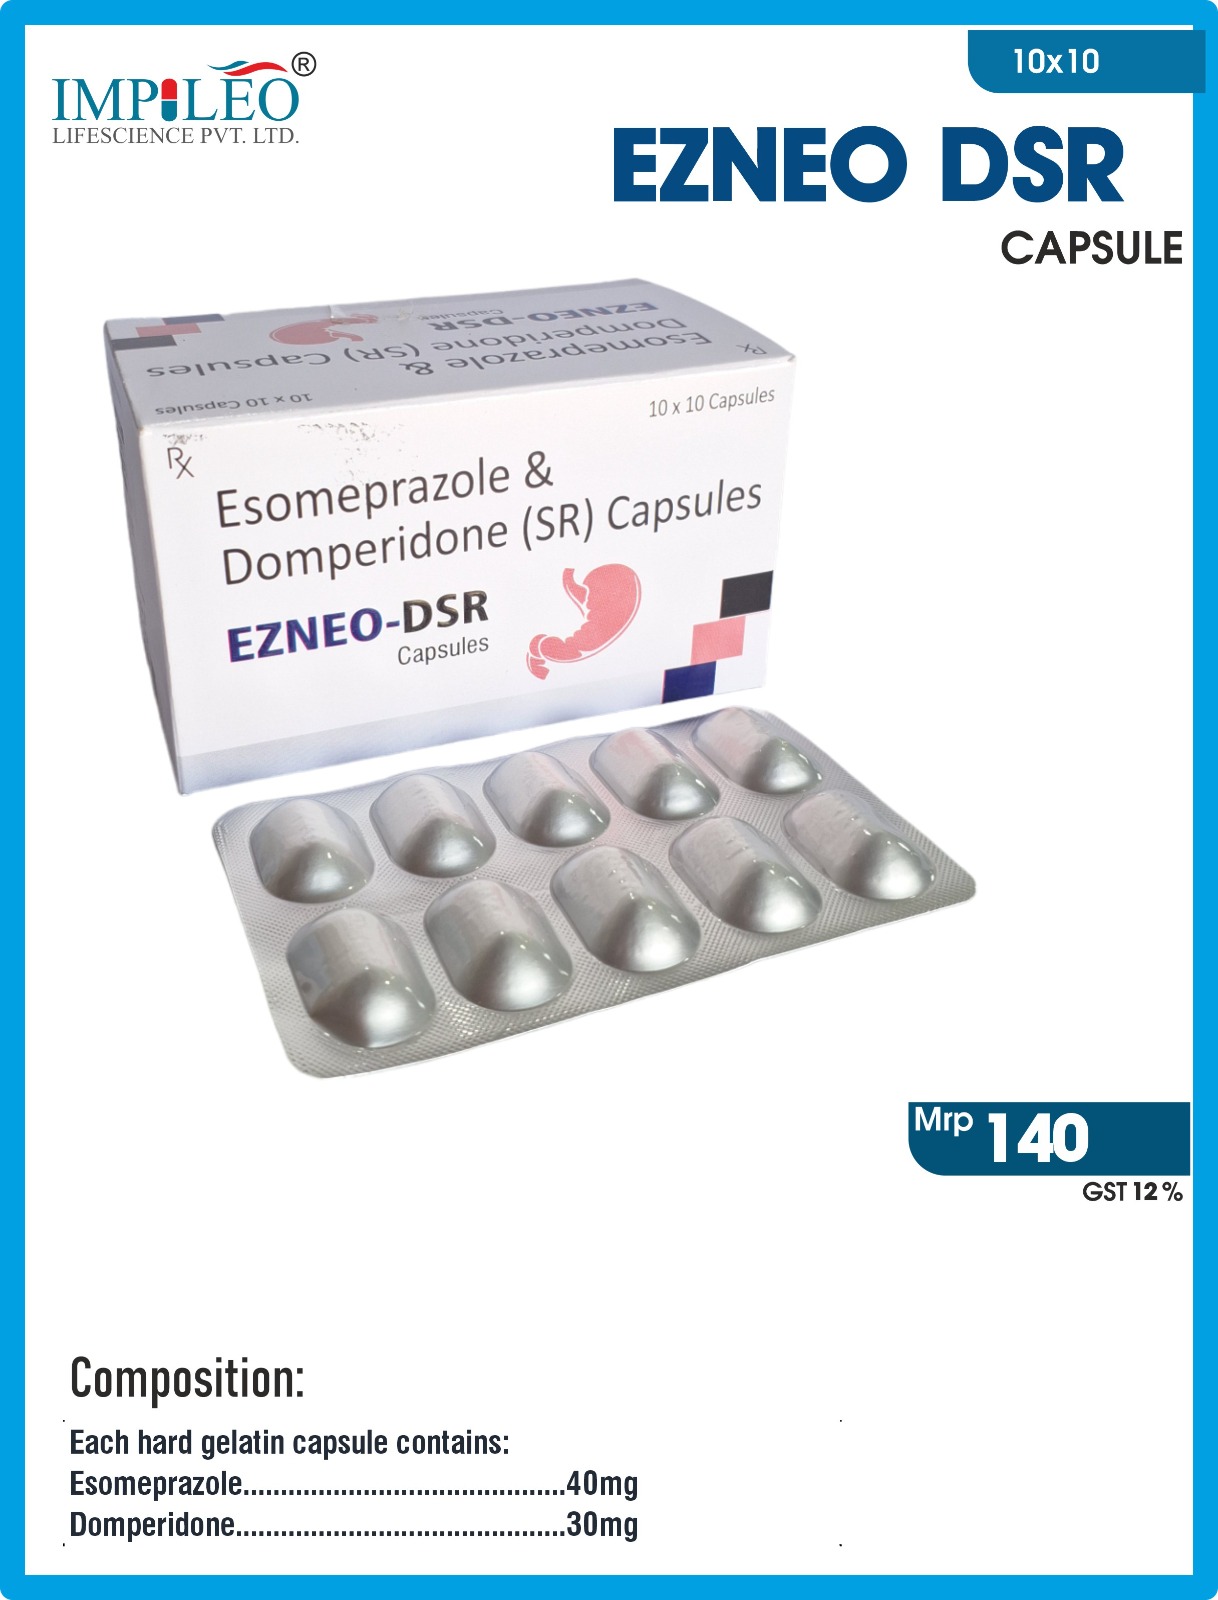 Trusted PCD Pharma Franchise in Chandigarh Offers EZNEO DSR Capsules